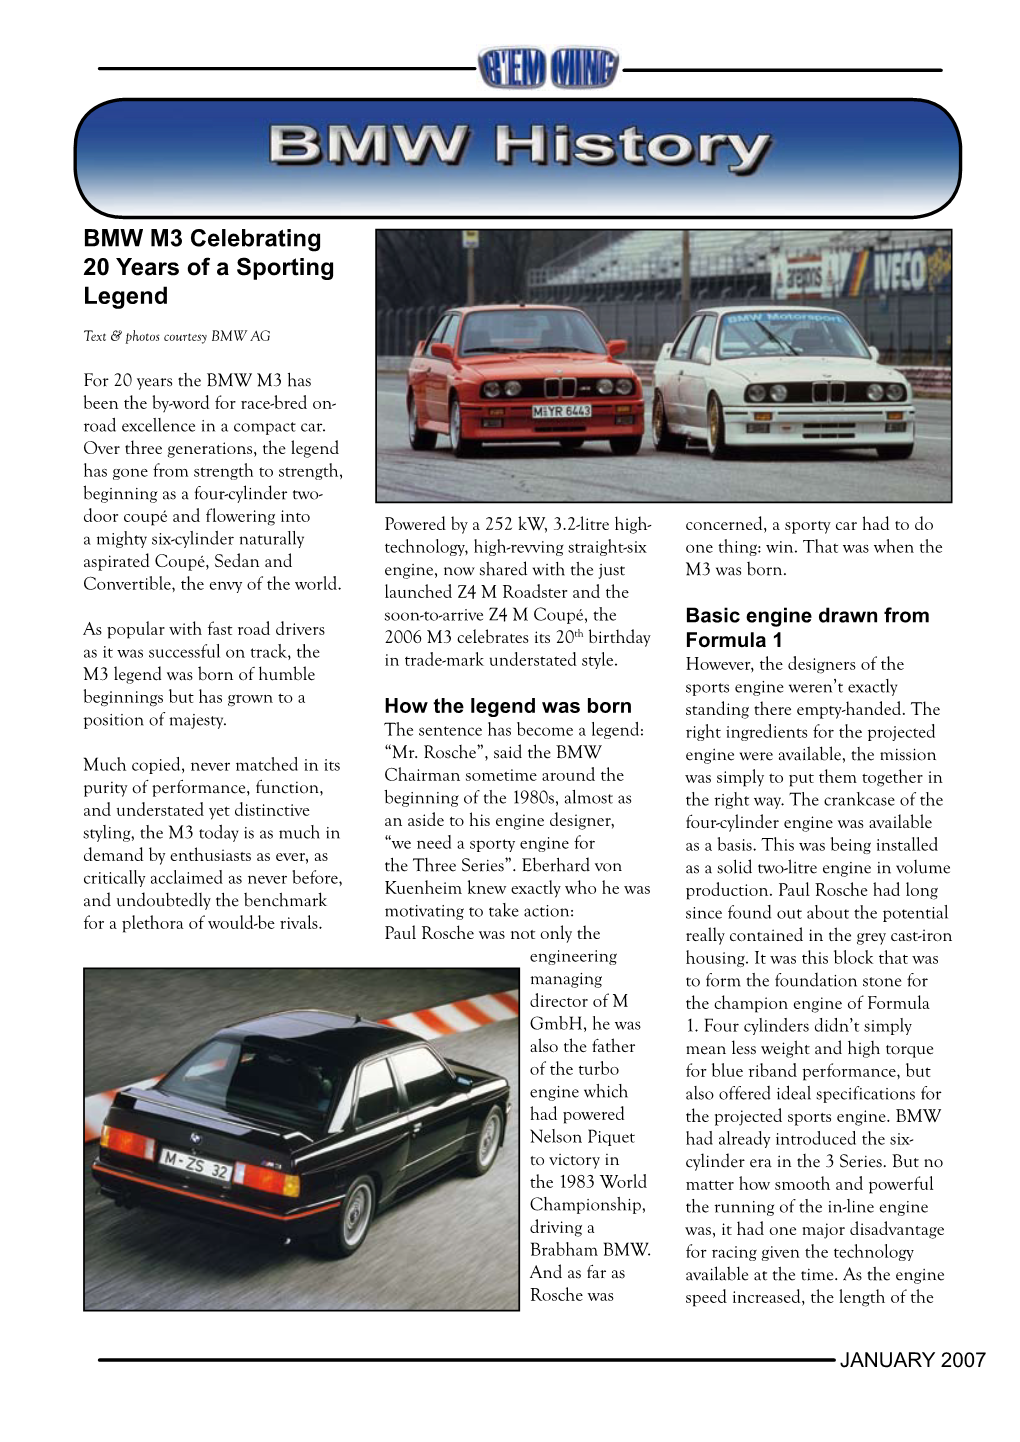 History of the M3